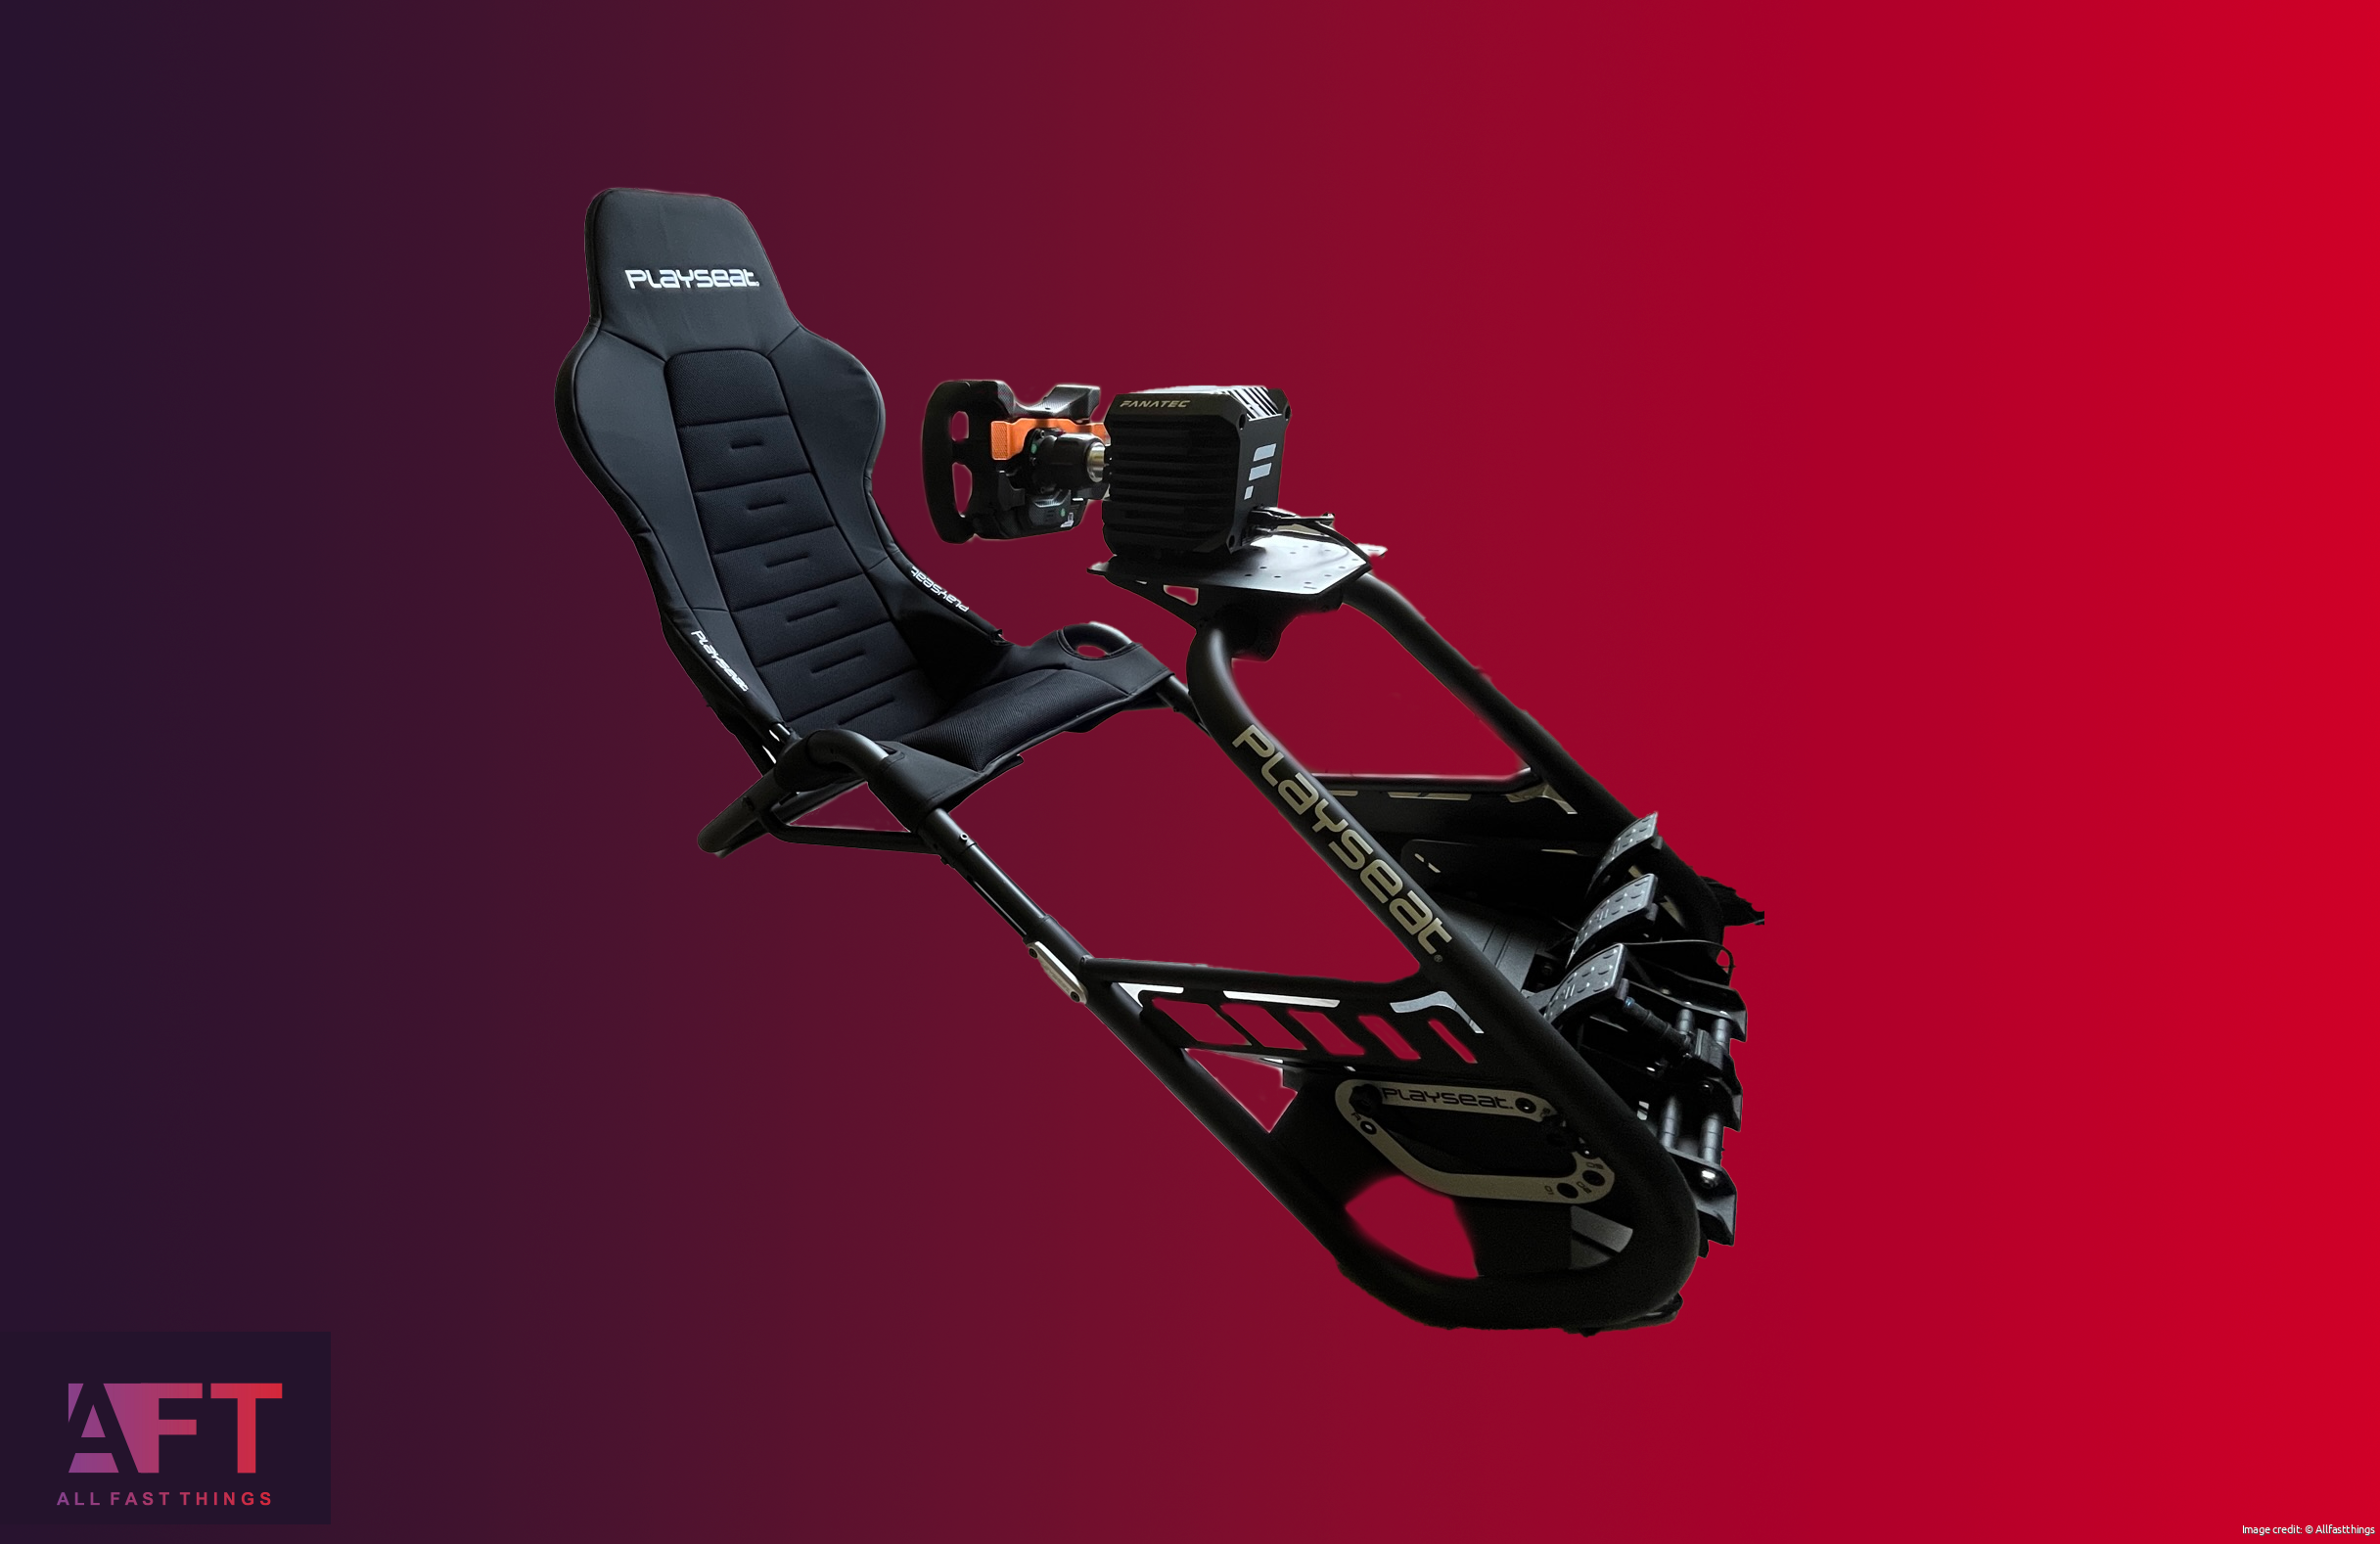 PLAYSEAT® TROPHY RED